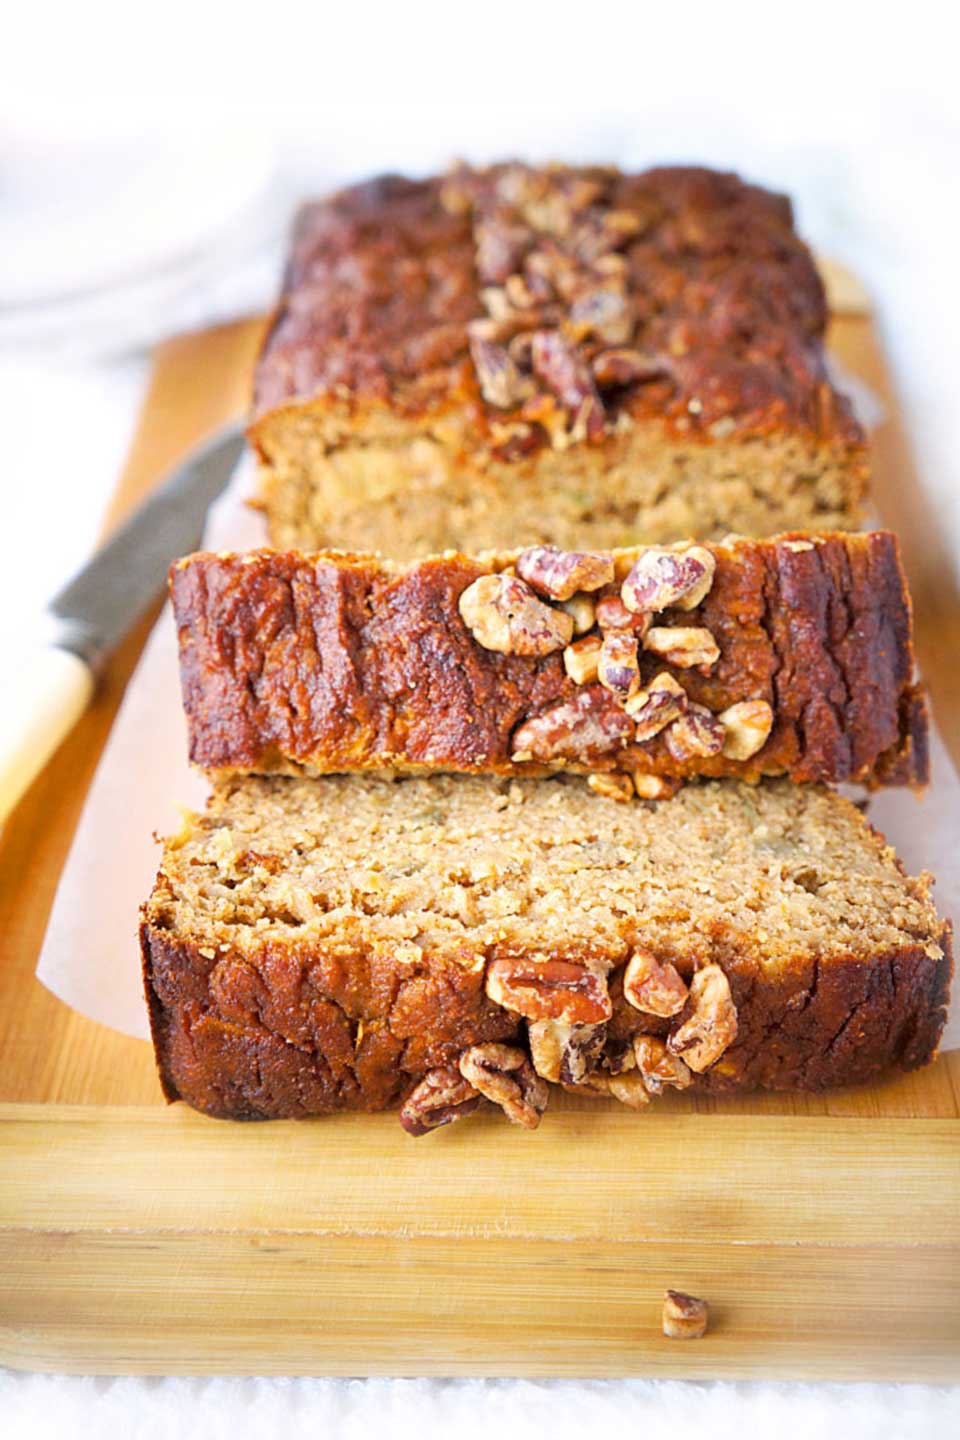 Healthier but so decadently delicious! Creative pumpkin bread recipes, from gluten free pumpkin bread to whole wheat, paleo to sugar free! Whatever “healthy” means to you, we’re sharing 15 of the very best pumpkin breads we could find! Bake one up today, and your pumpkin spice latte will never be lonely again! | pumpkin recipes | pumpkin bread healthy | gluten free | grain free | paleo | whole wheat | refined sugar free | dairy free | #healthyrecipes #pumpkin #bread | www.TwoHealthyKitchens.com